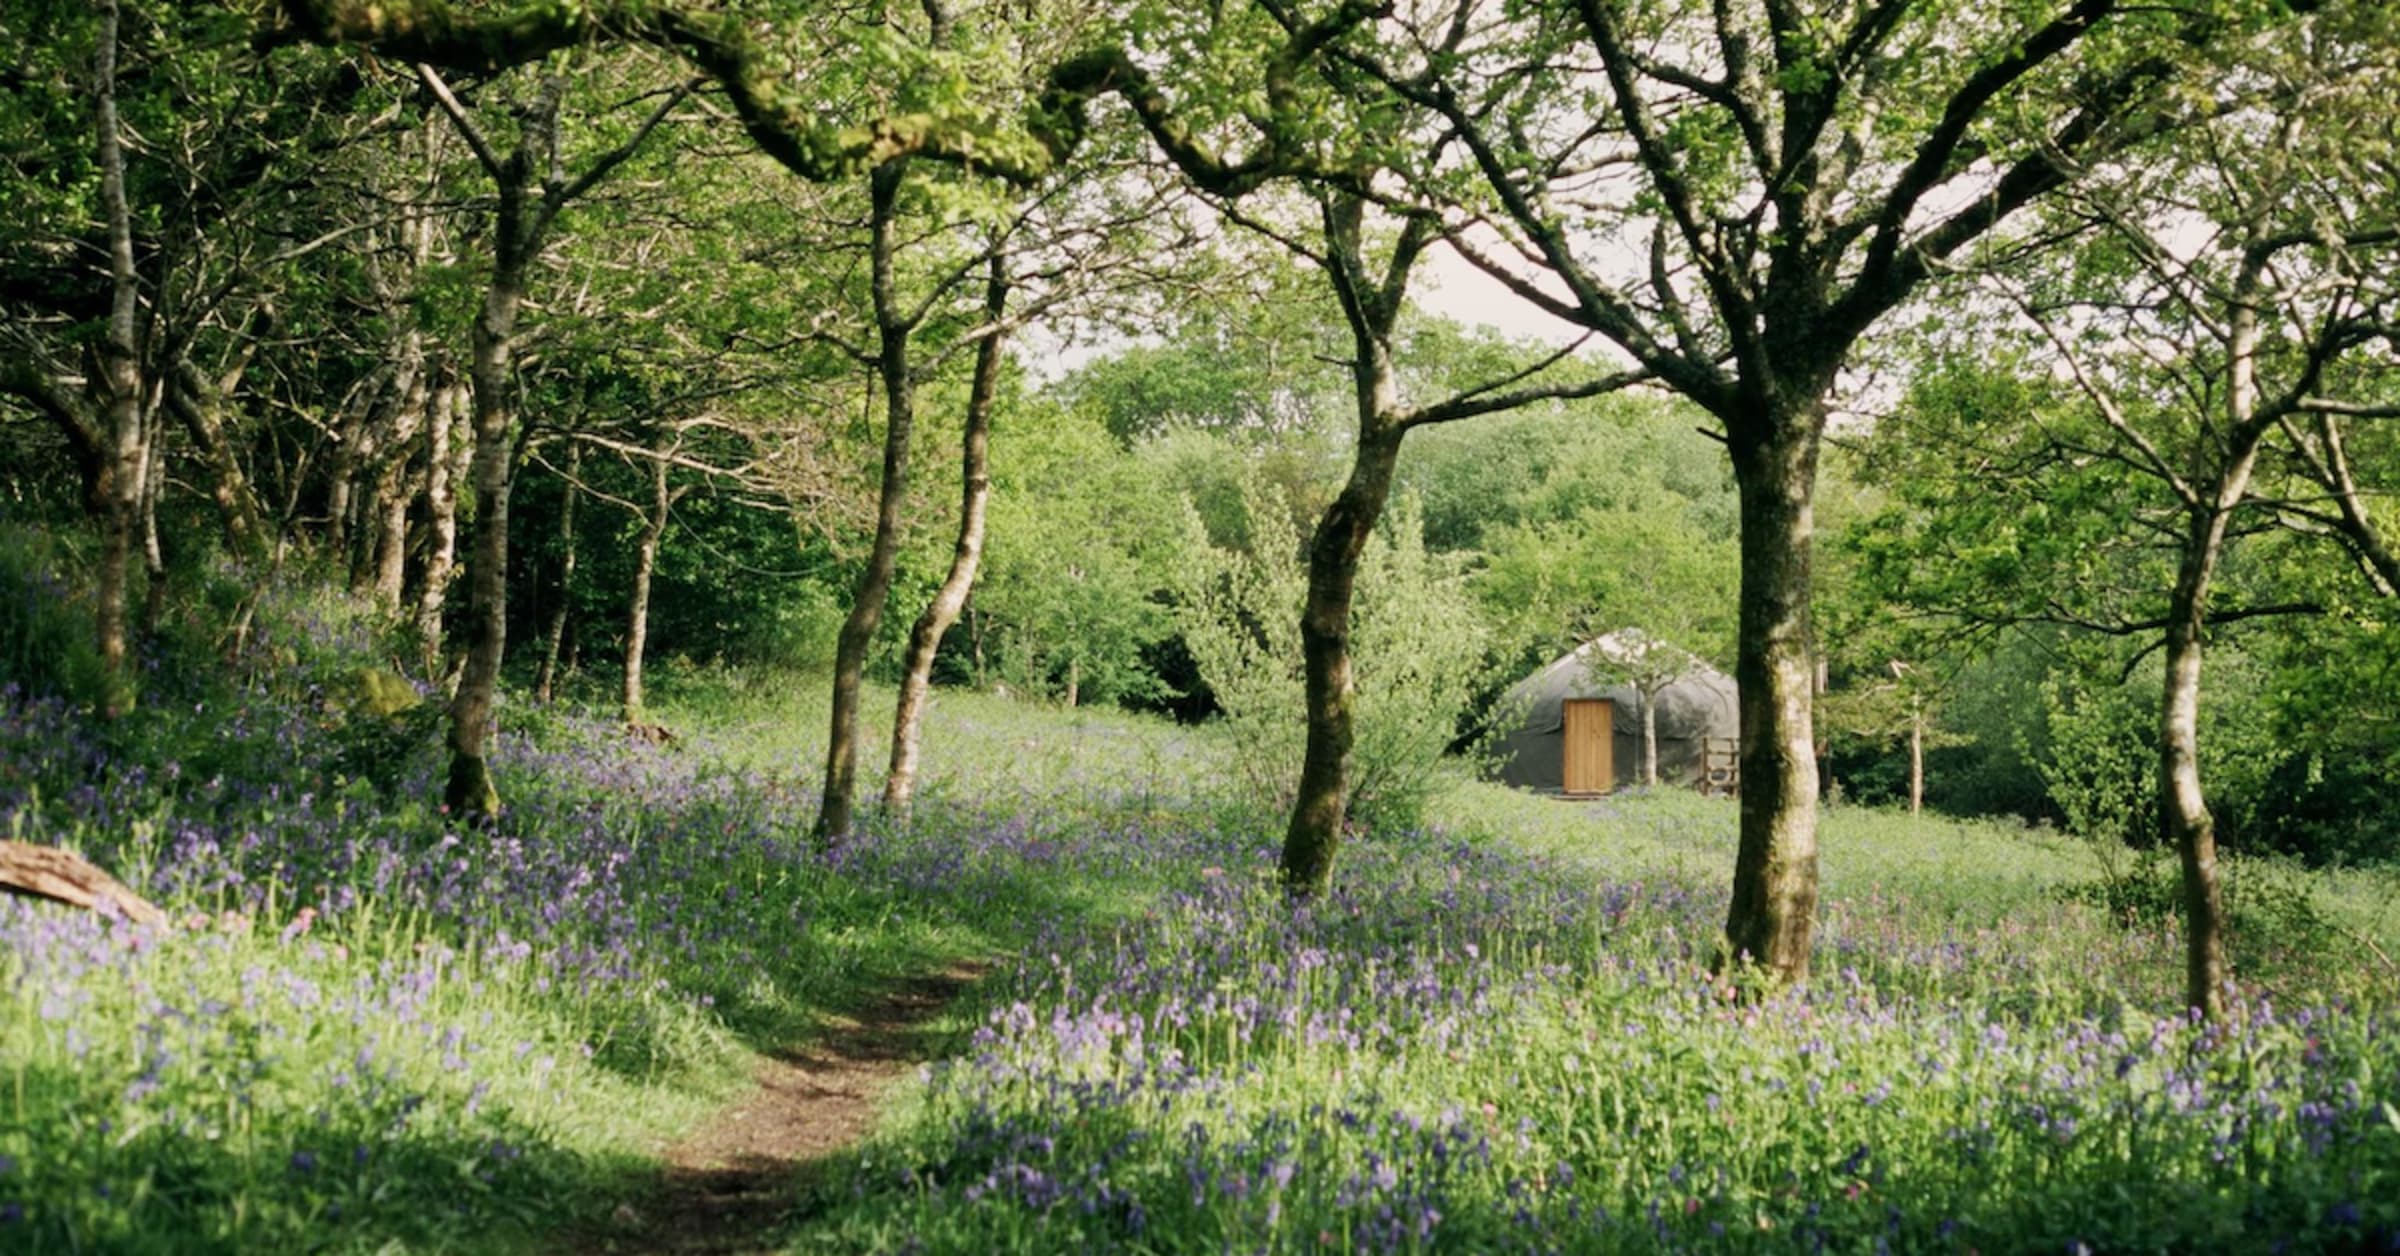 The Best Places to See Blooming Bluebells in the UK